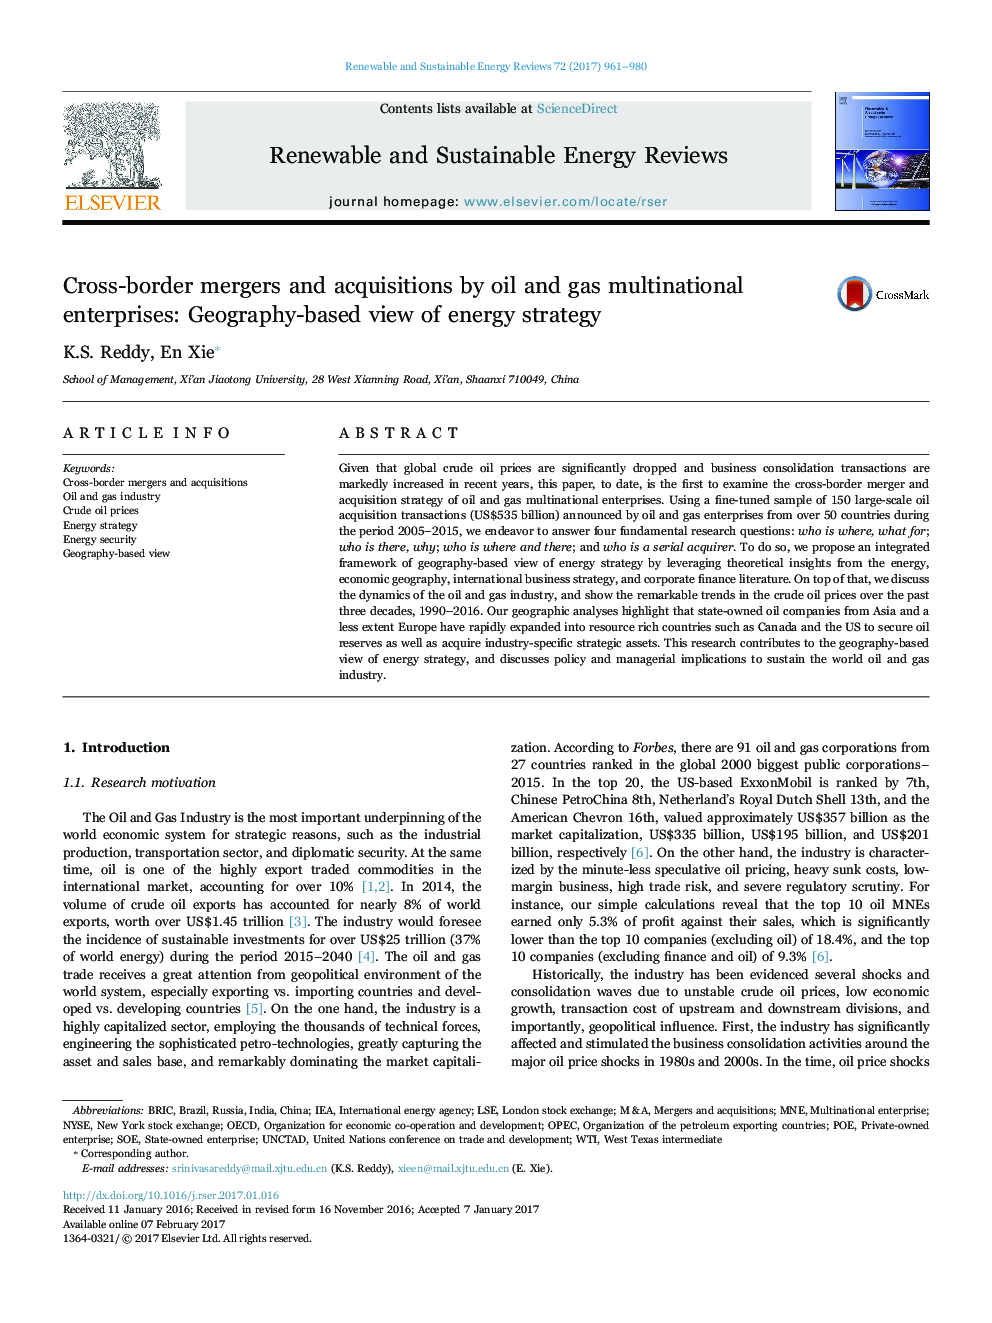 Cross-border mergers and acquisitions by oil and gas multinational enterprises: Geography-based view of energy strategy